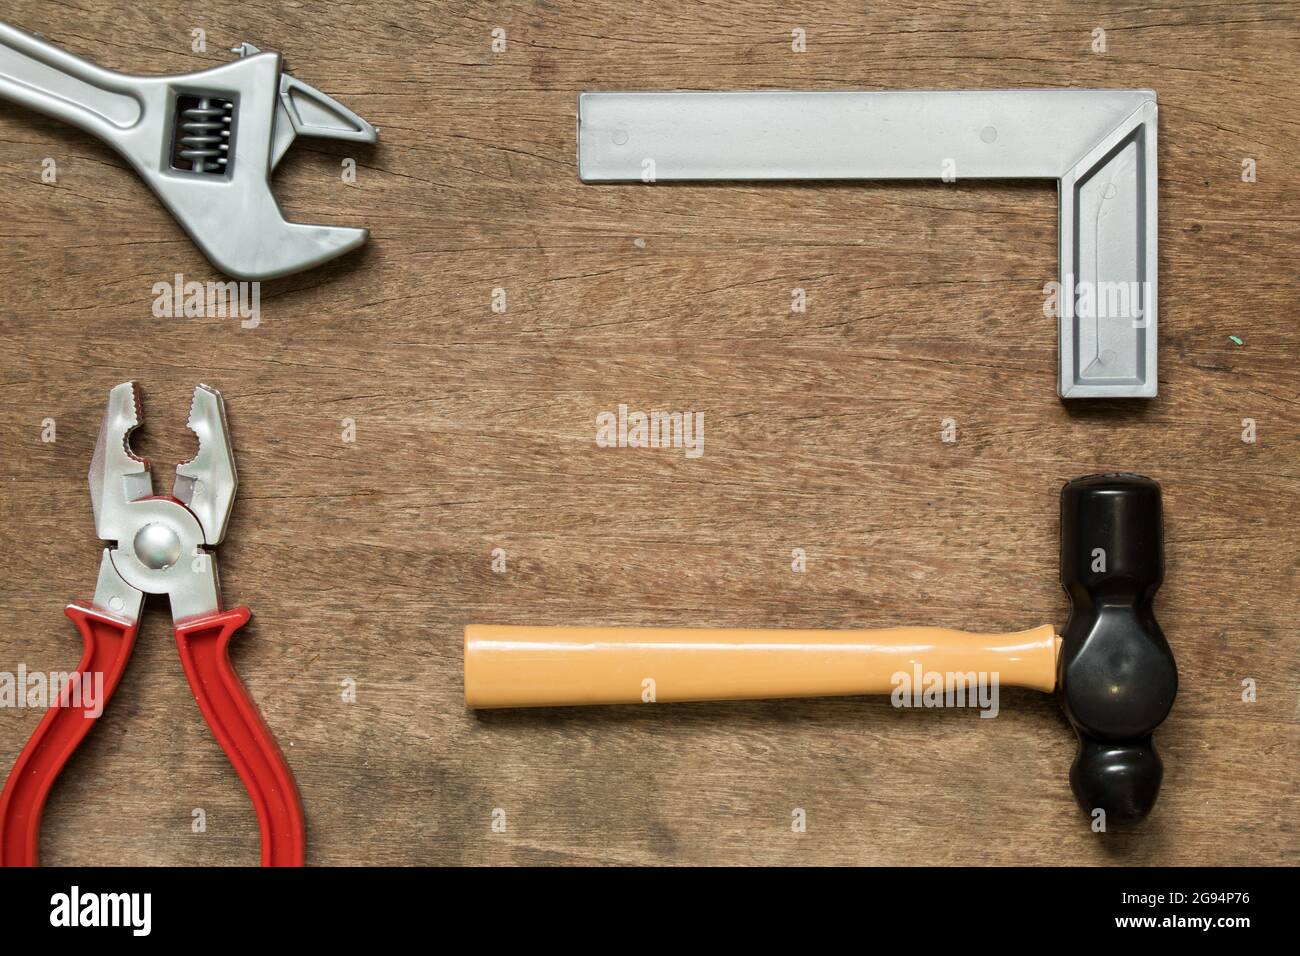 Toy equipment tool (hammer, mschinist square, wrench, pliers) with copy space on wood background Stock Photo